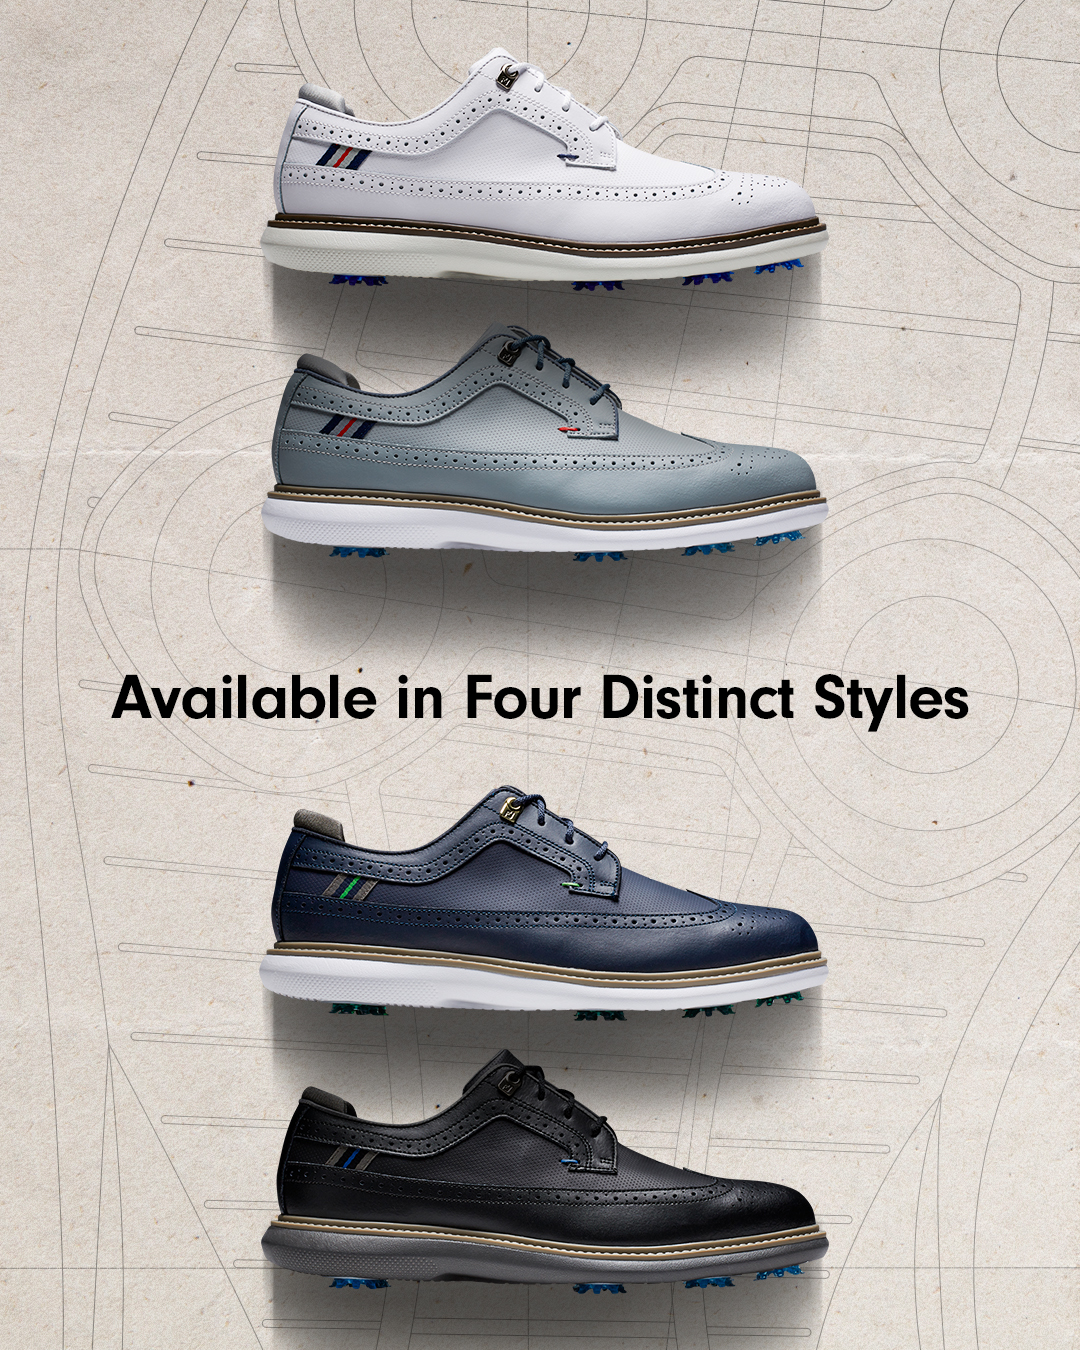 The New FJ Traditions are Simply Classic